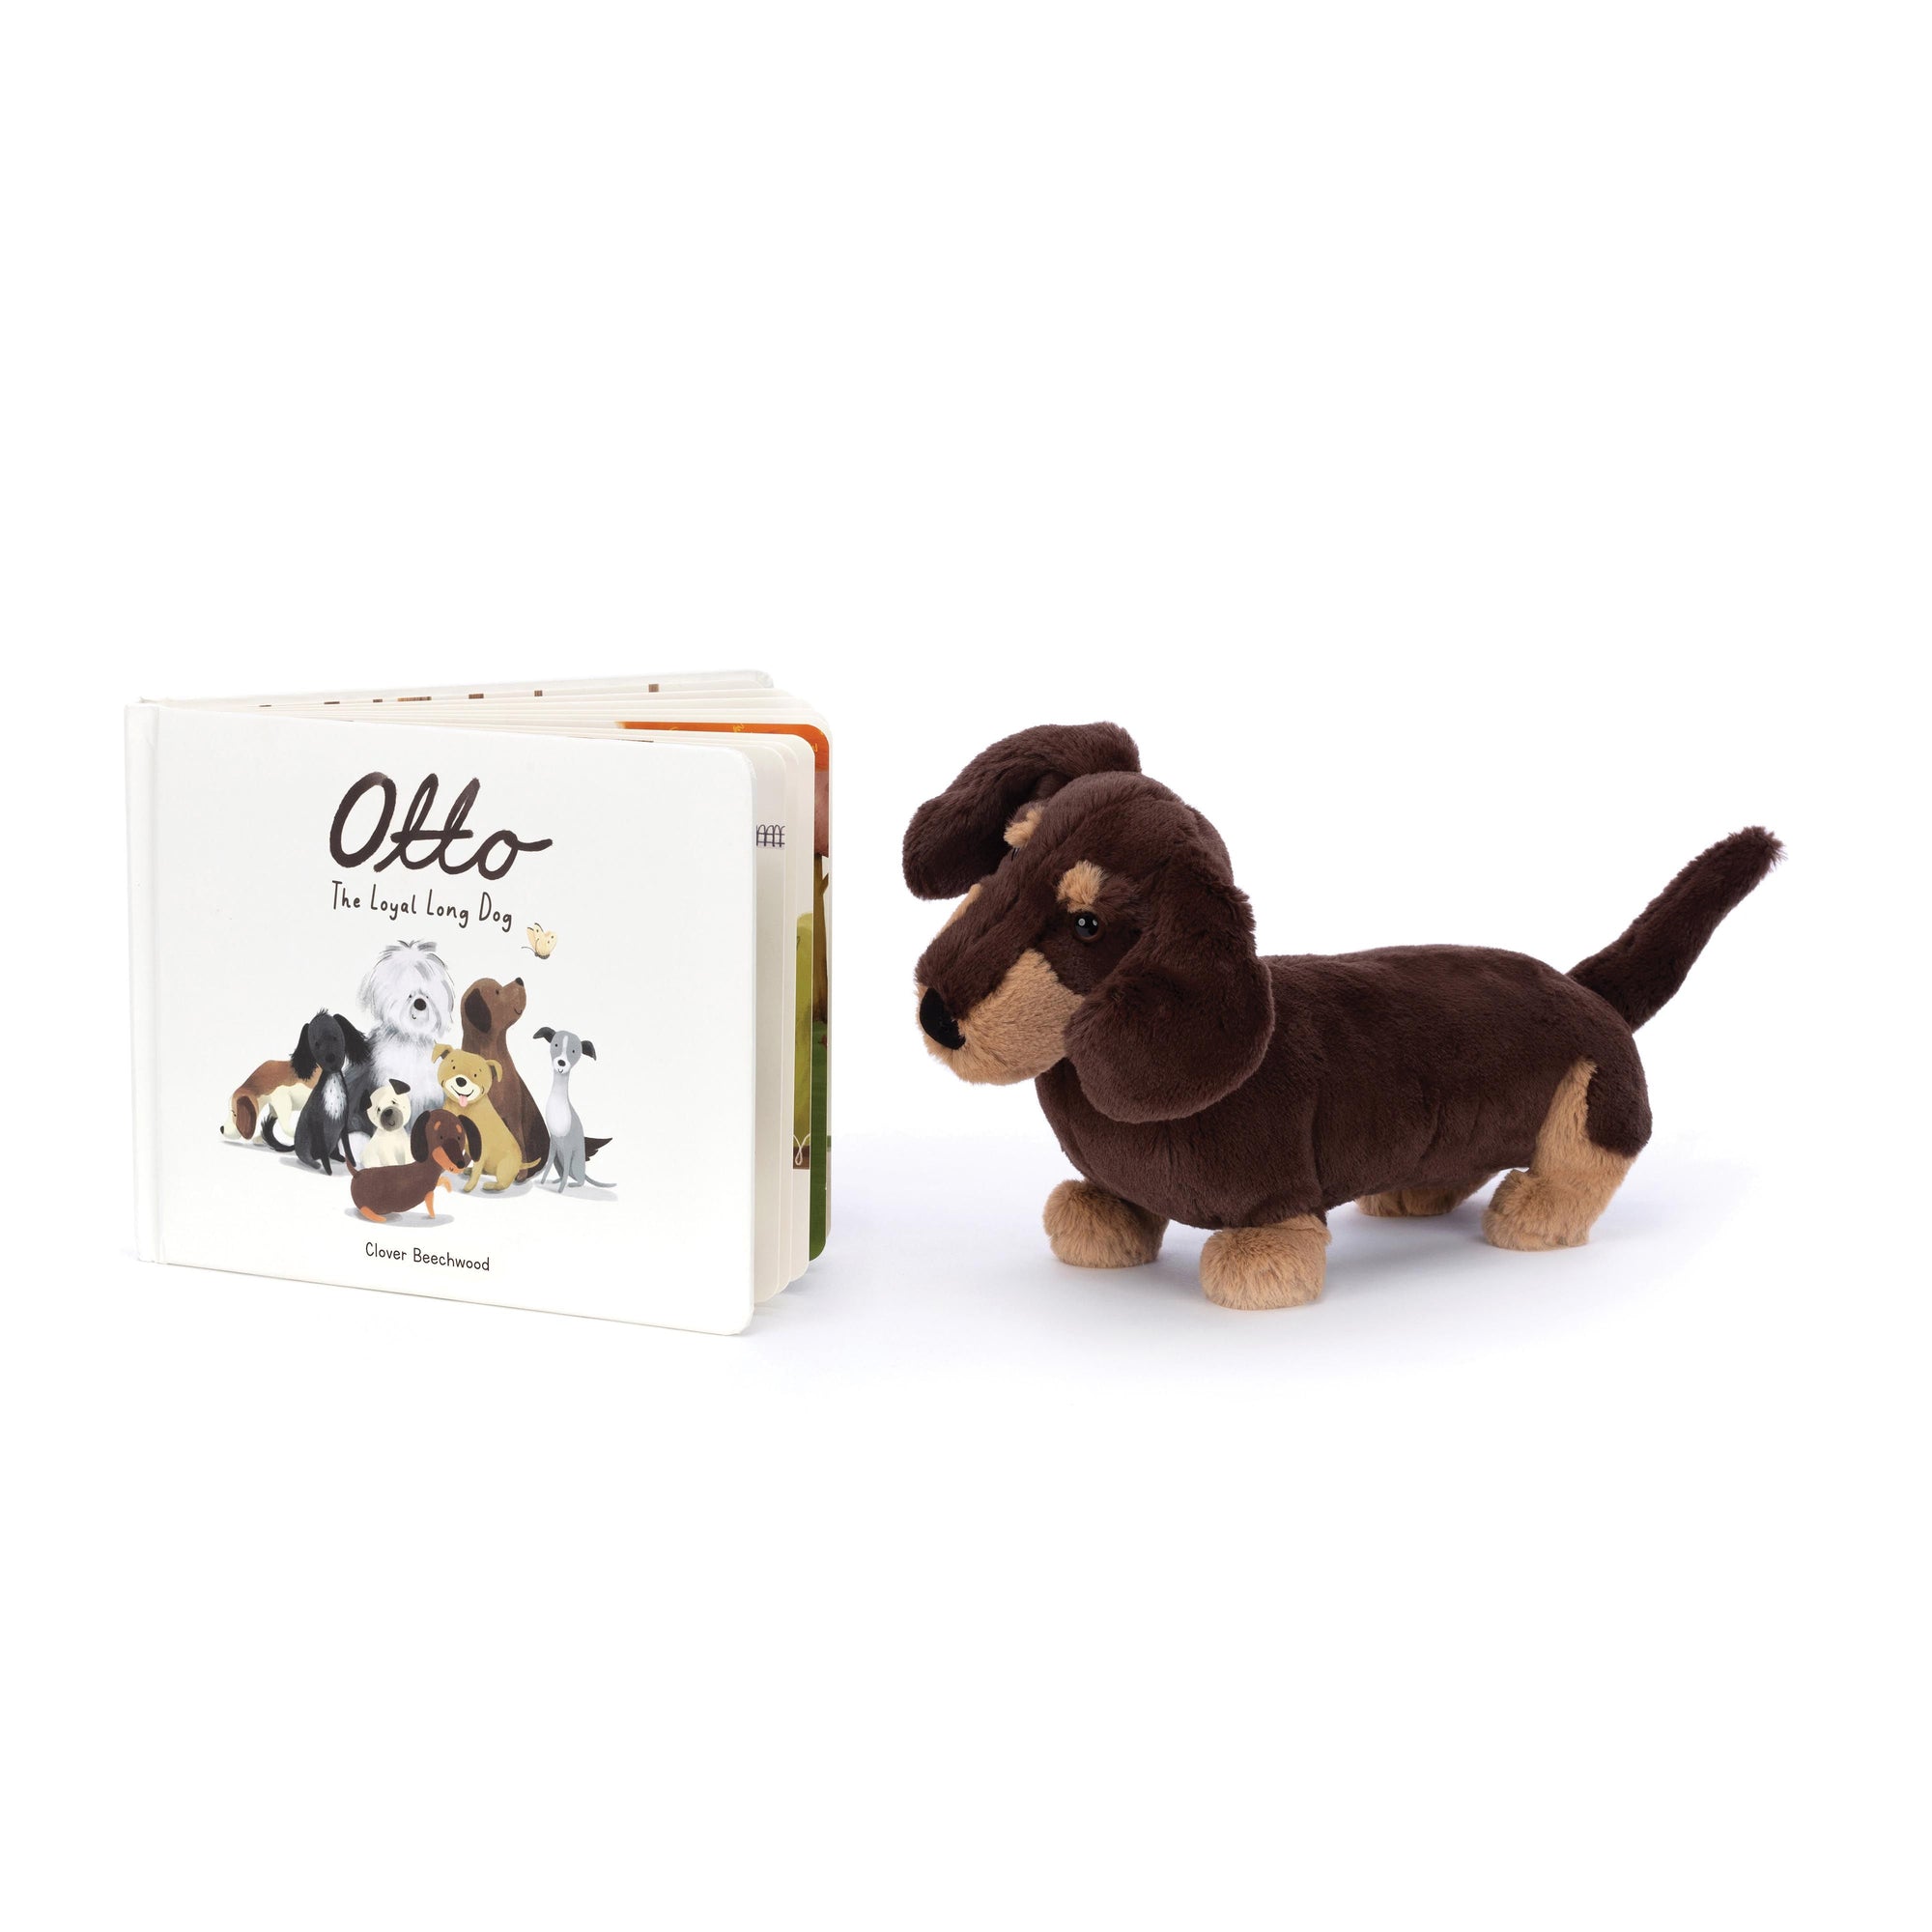 Jellycat sausage dog book - angus and dudley